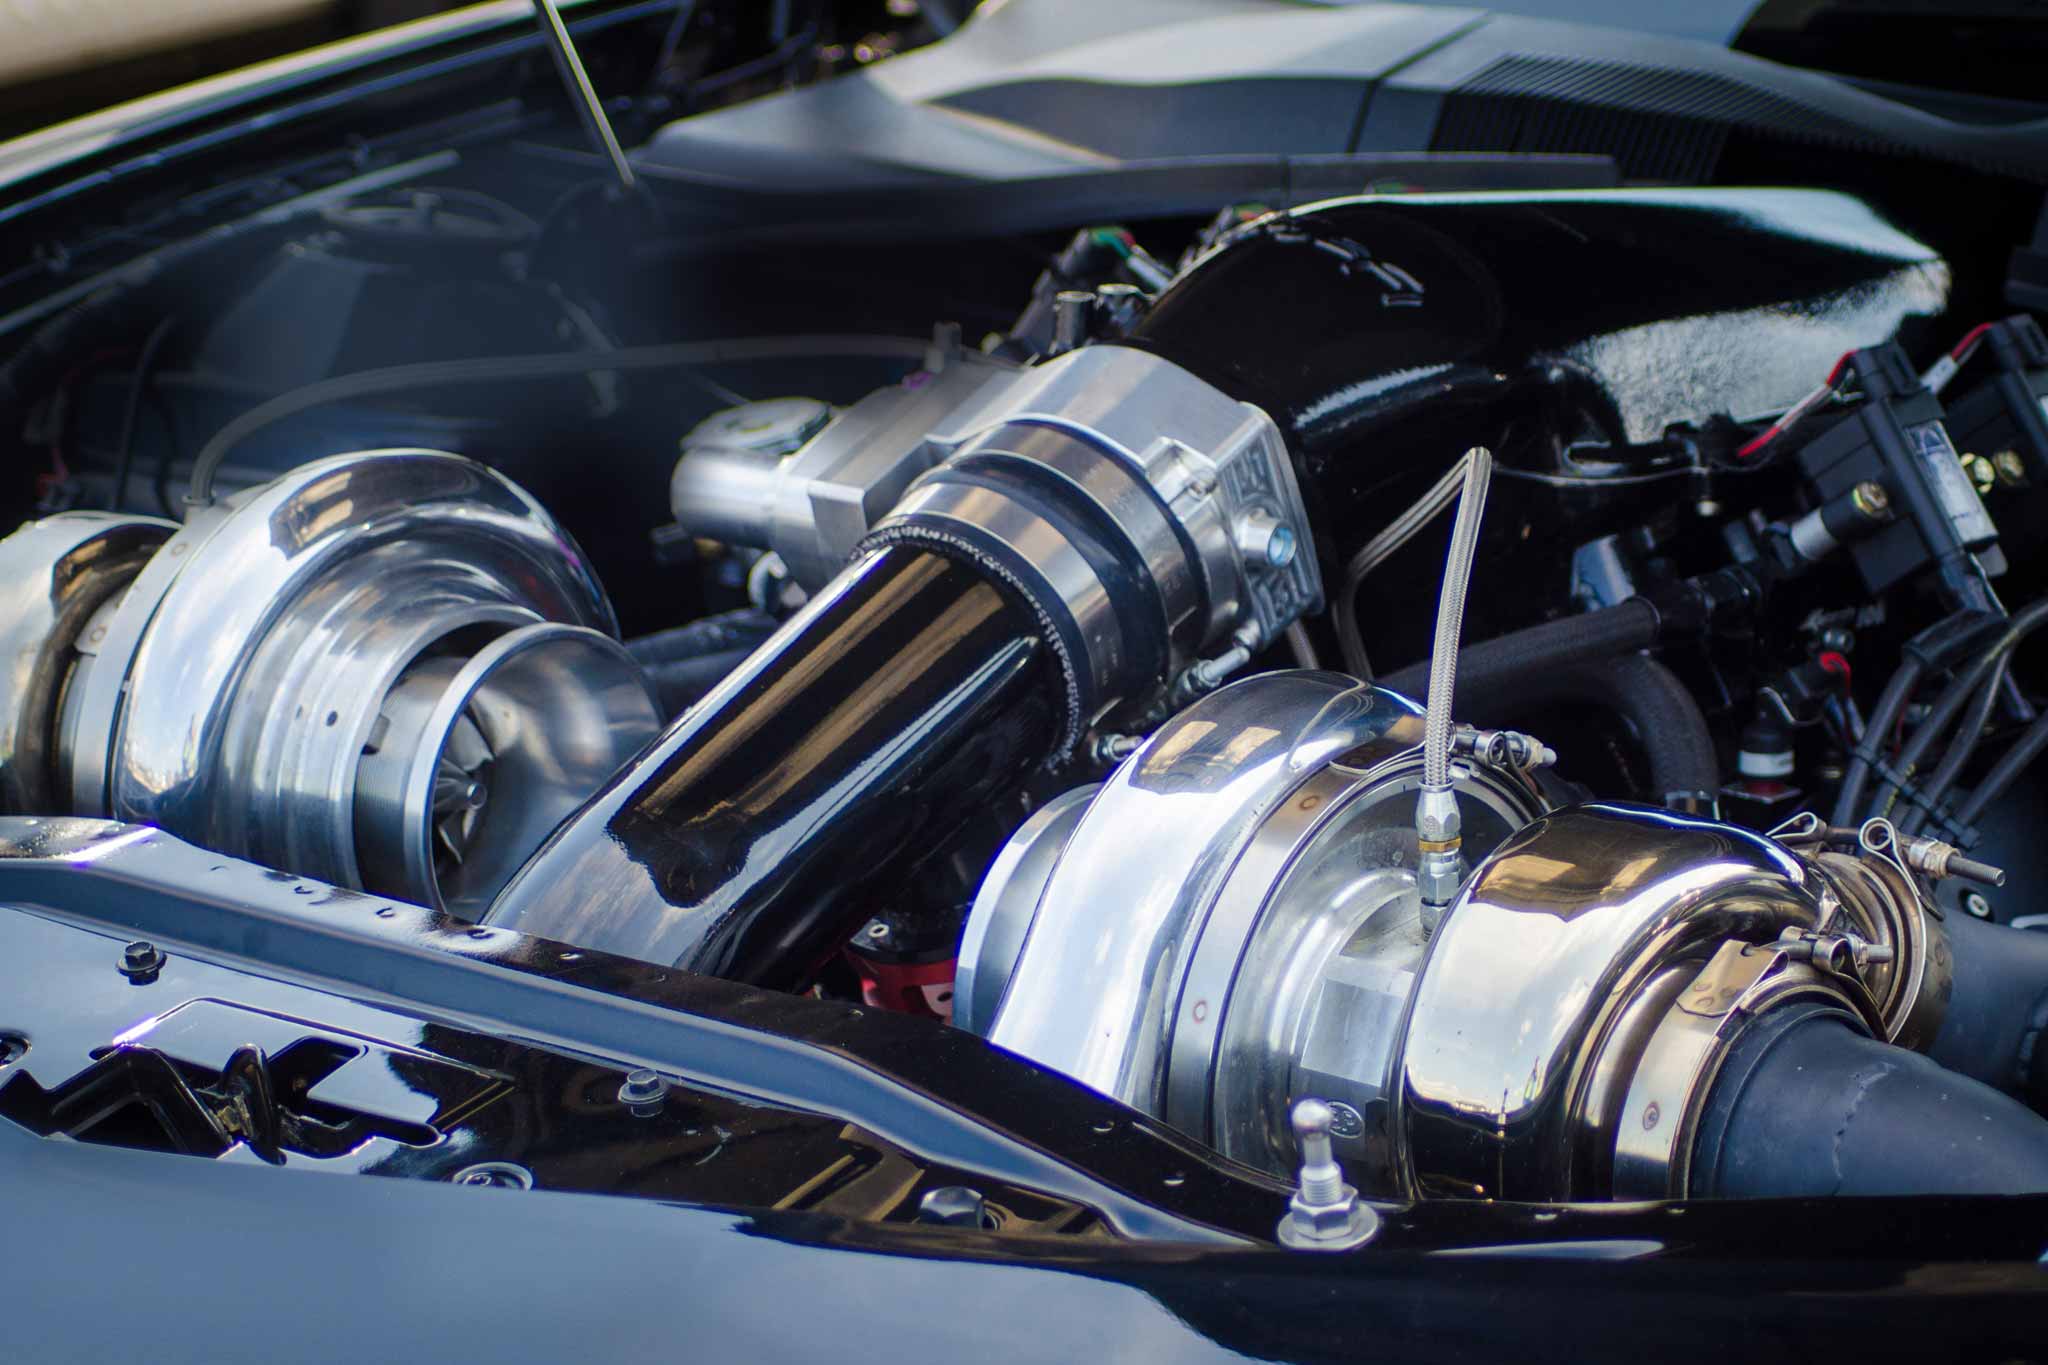 A view into the engine compartment of a car with turbocharger.